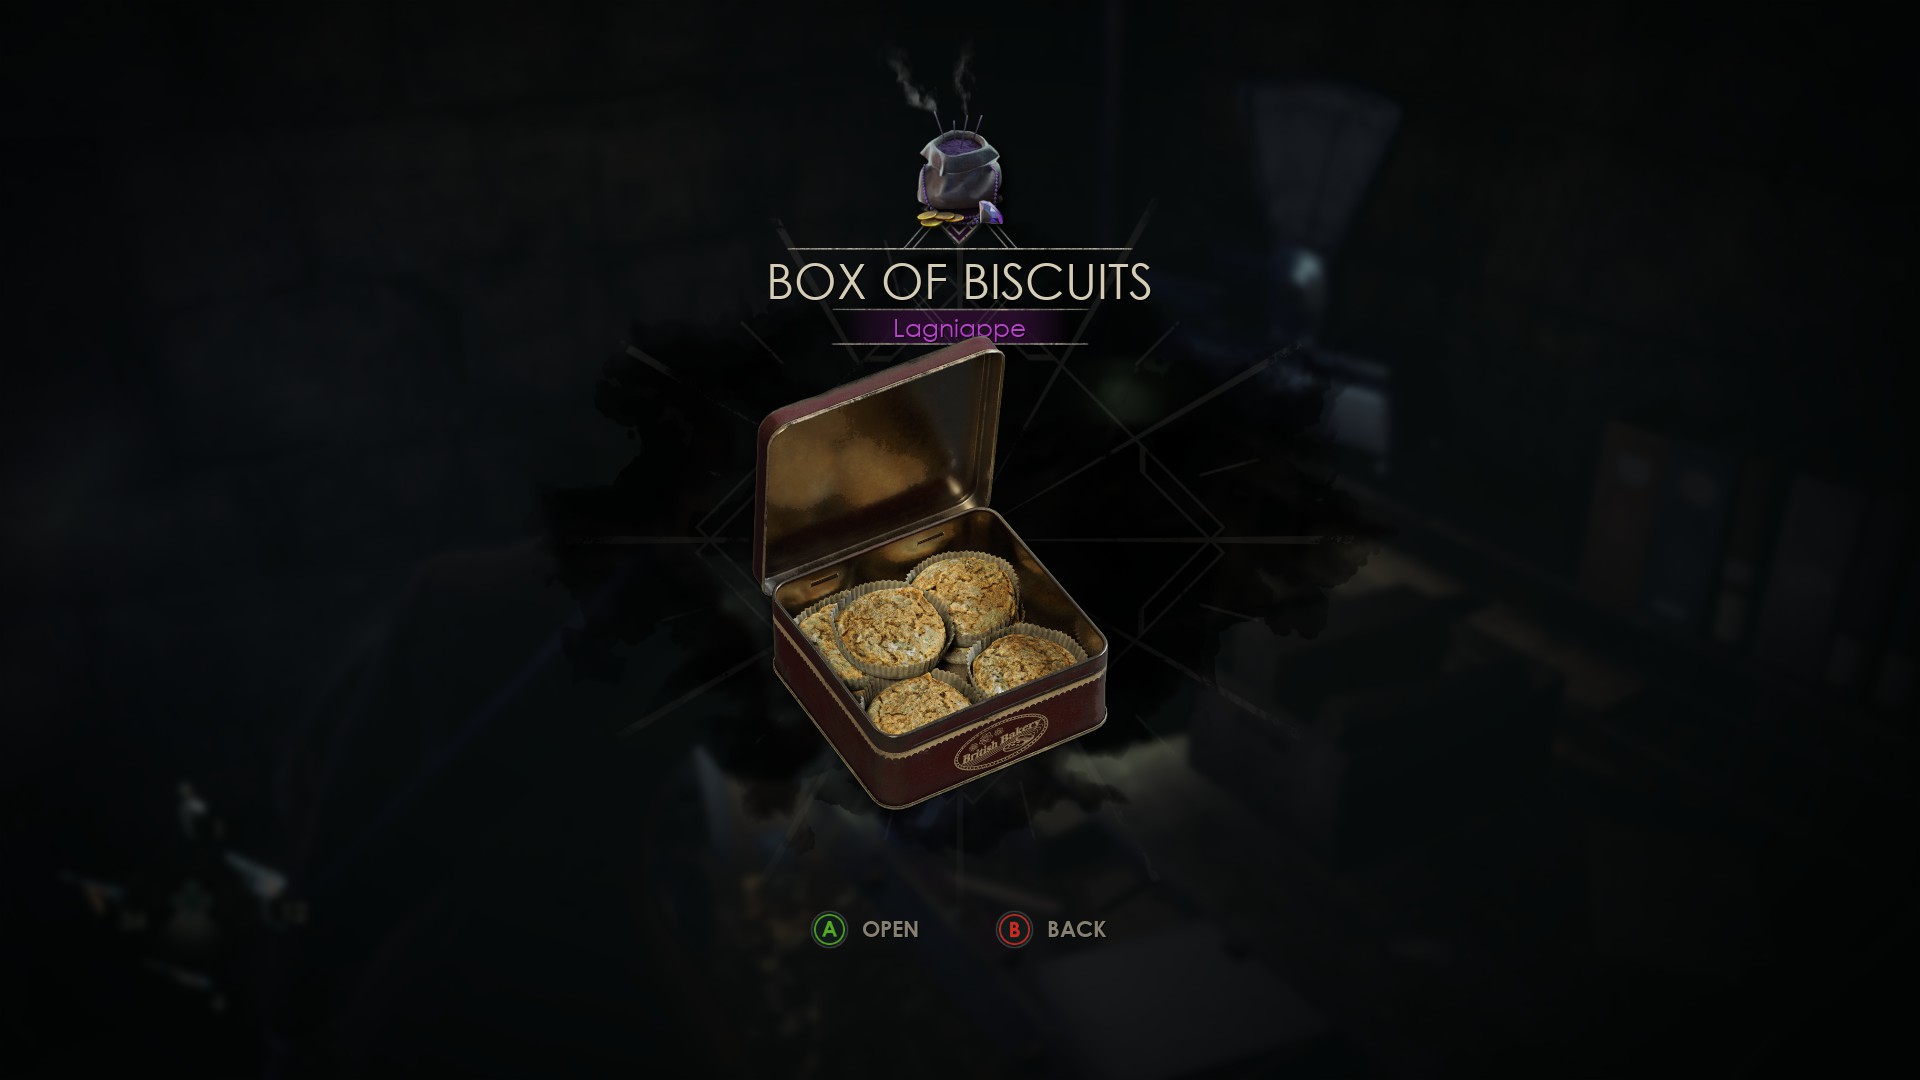 alone in the dark box of biscuits featured image